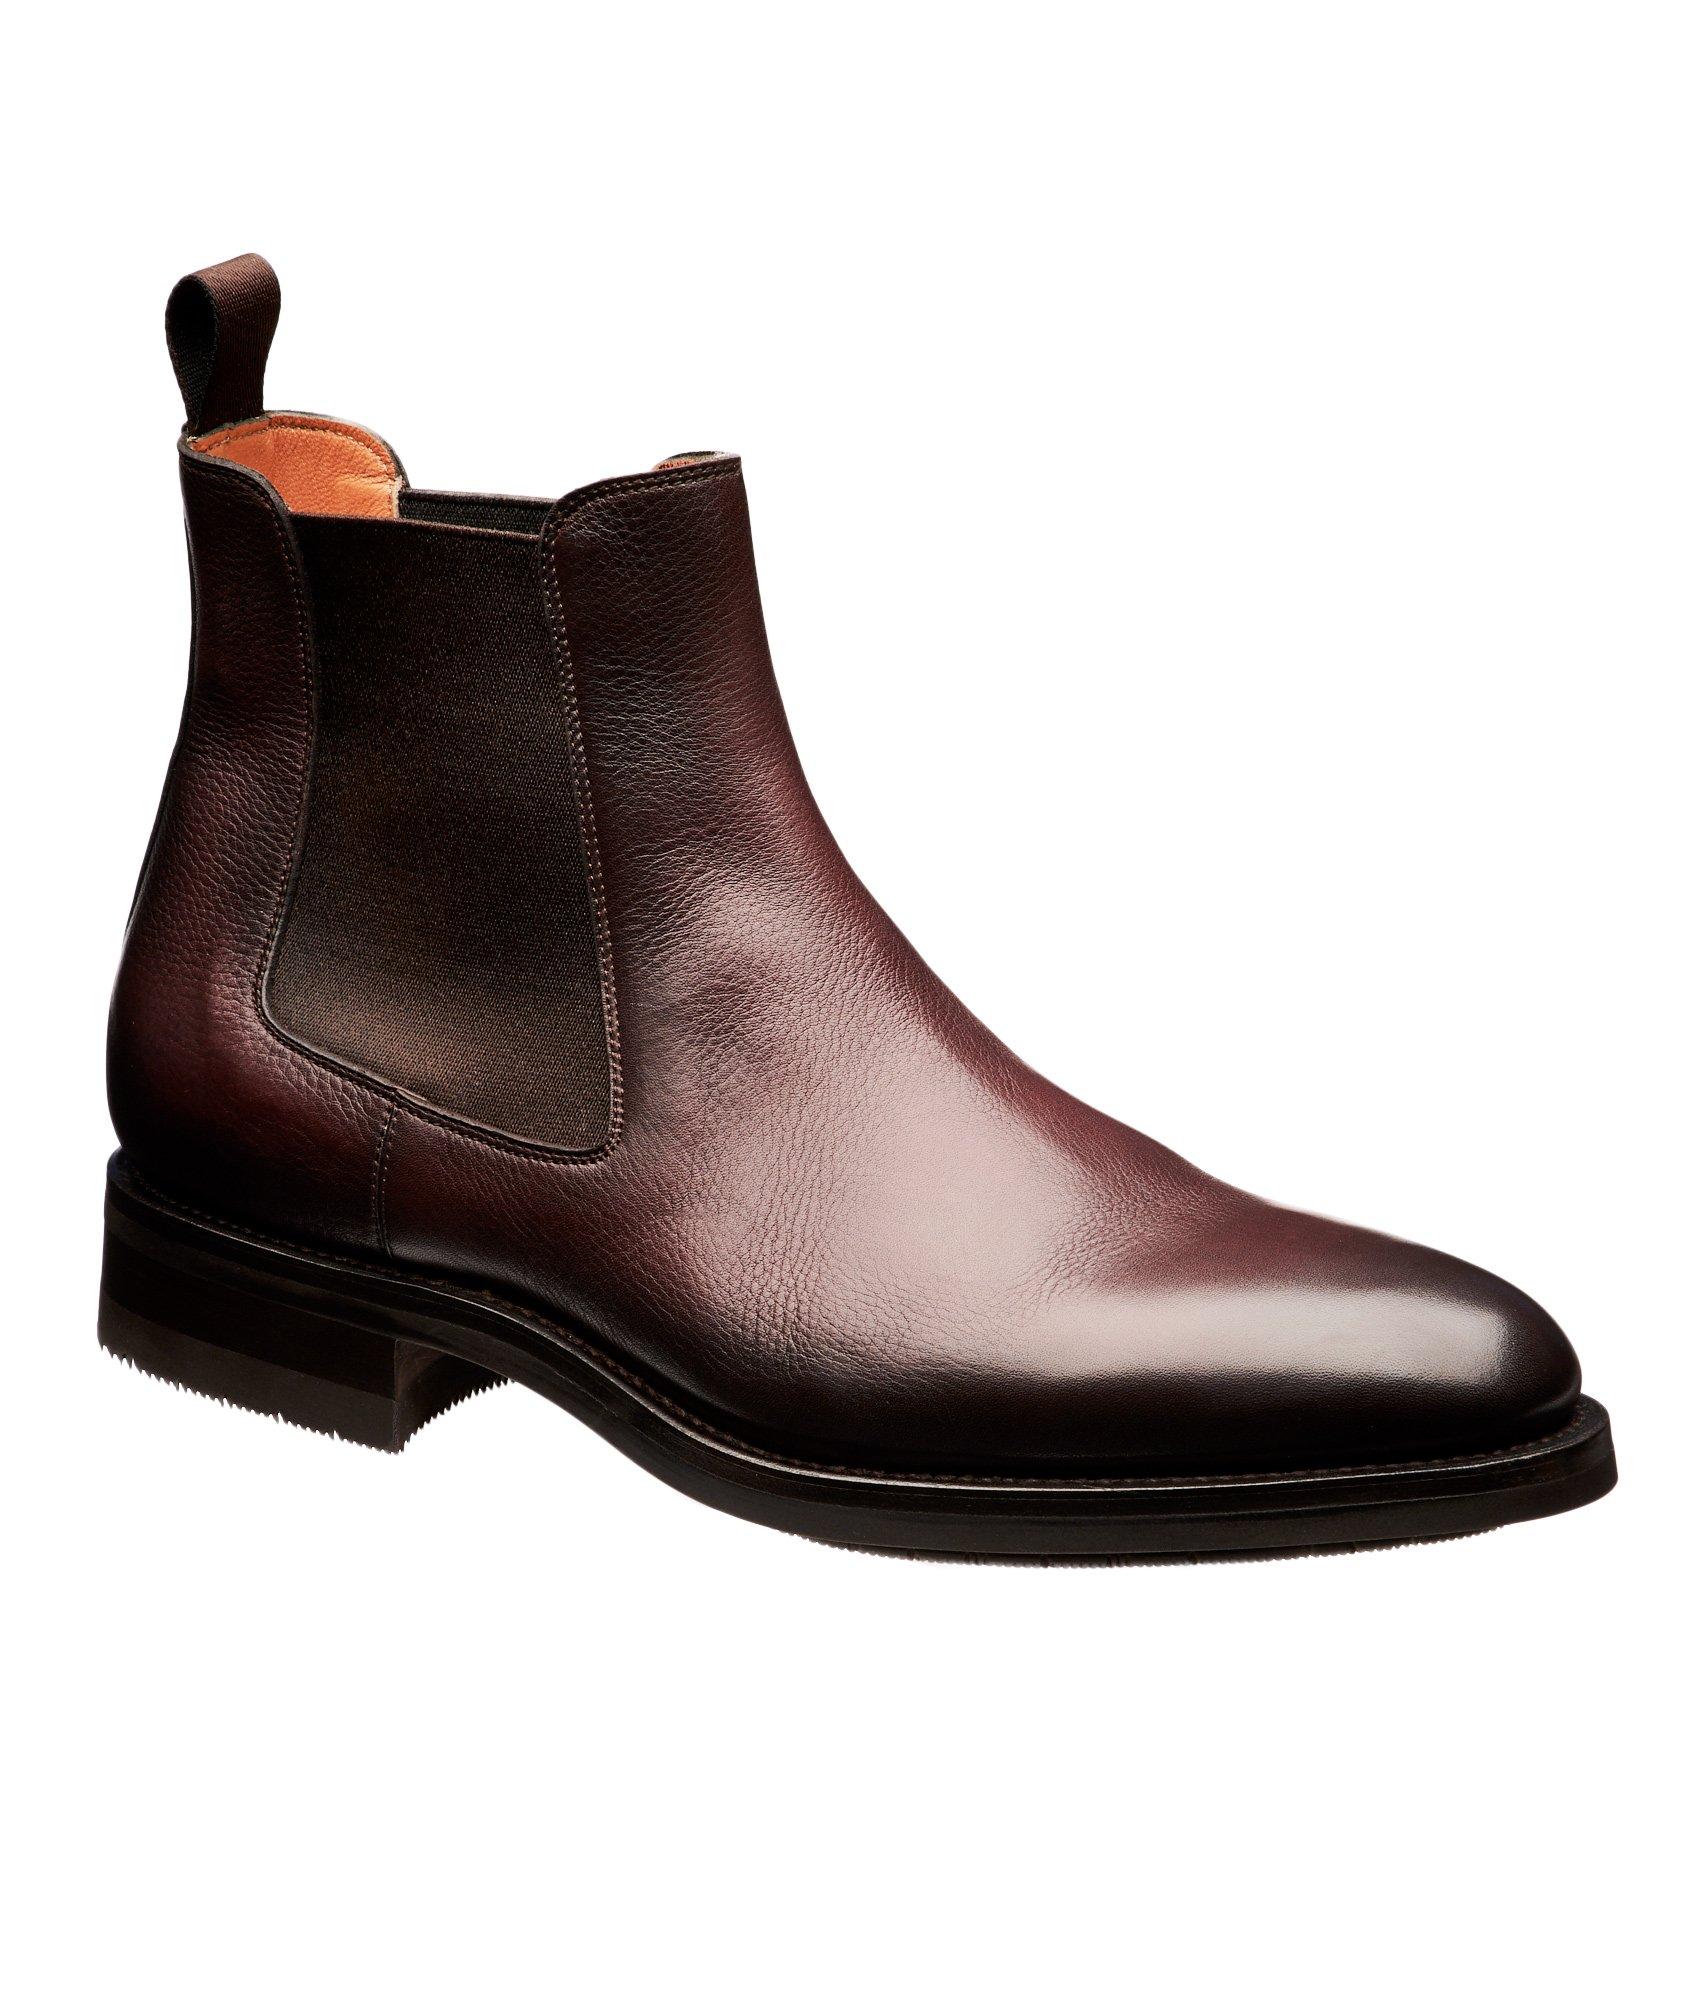 Burnished Leather Chelsea Boots image 0